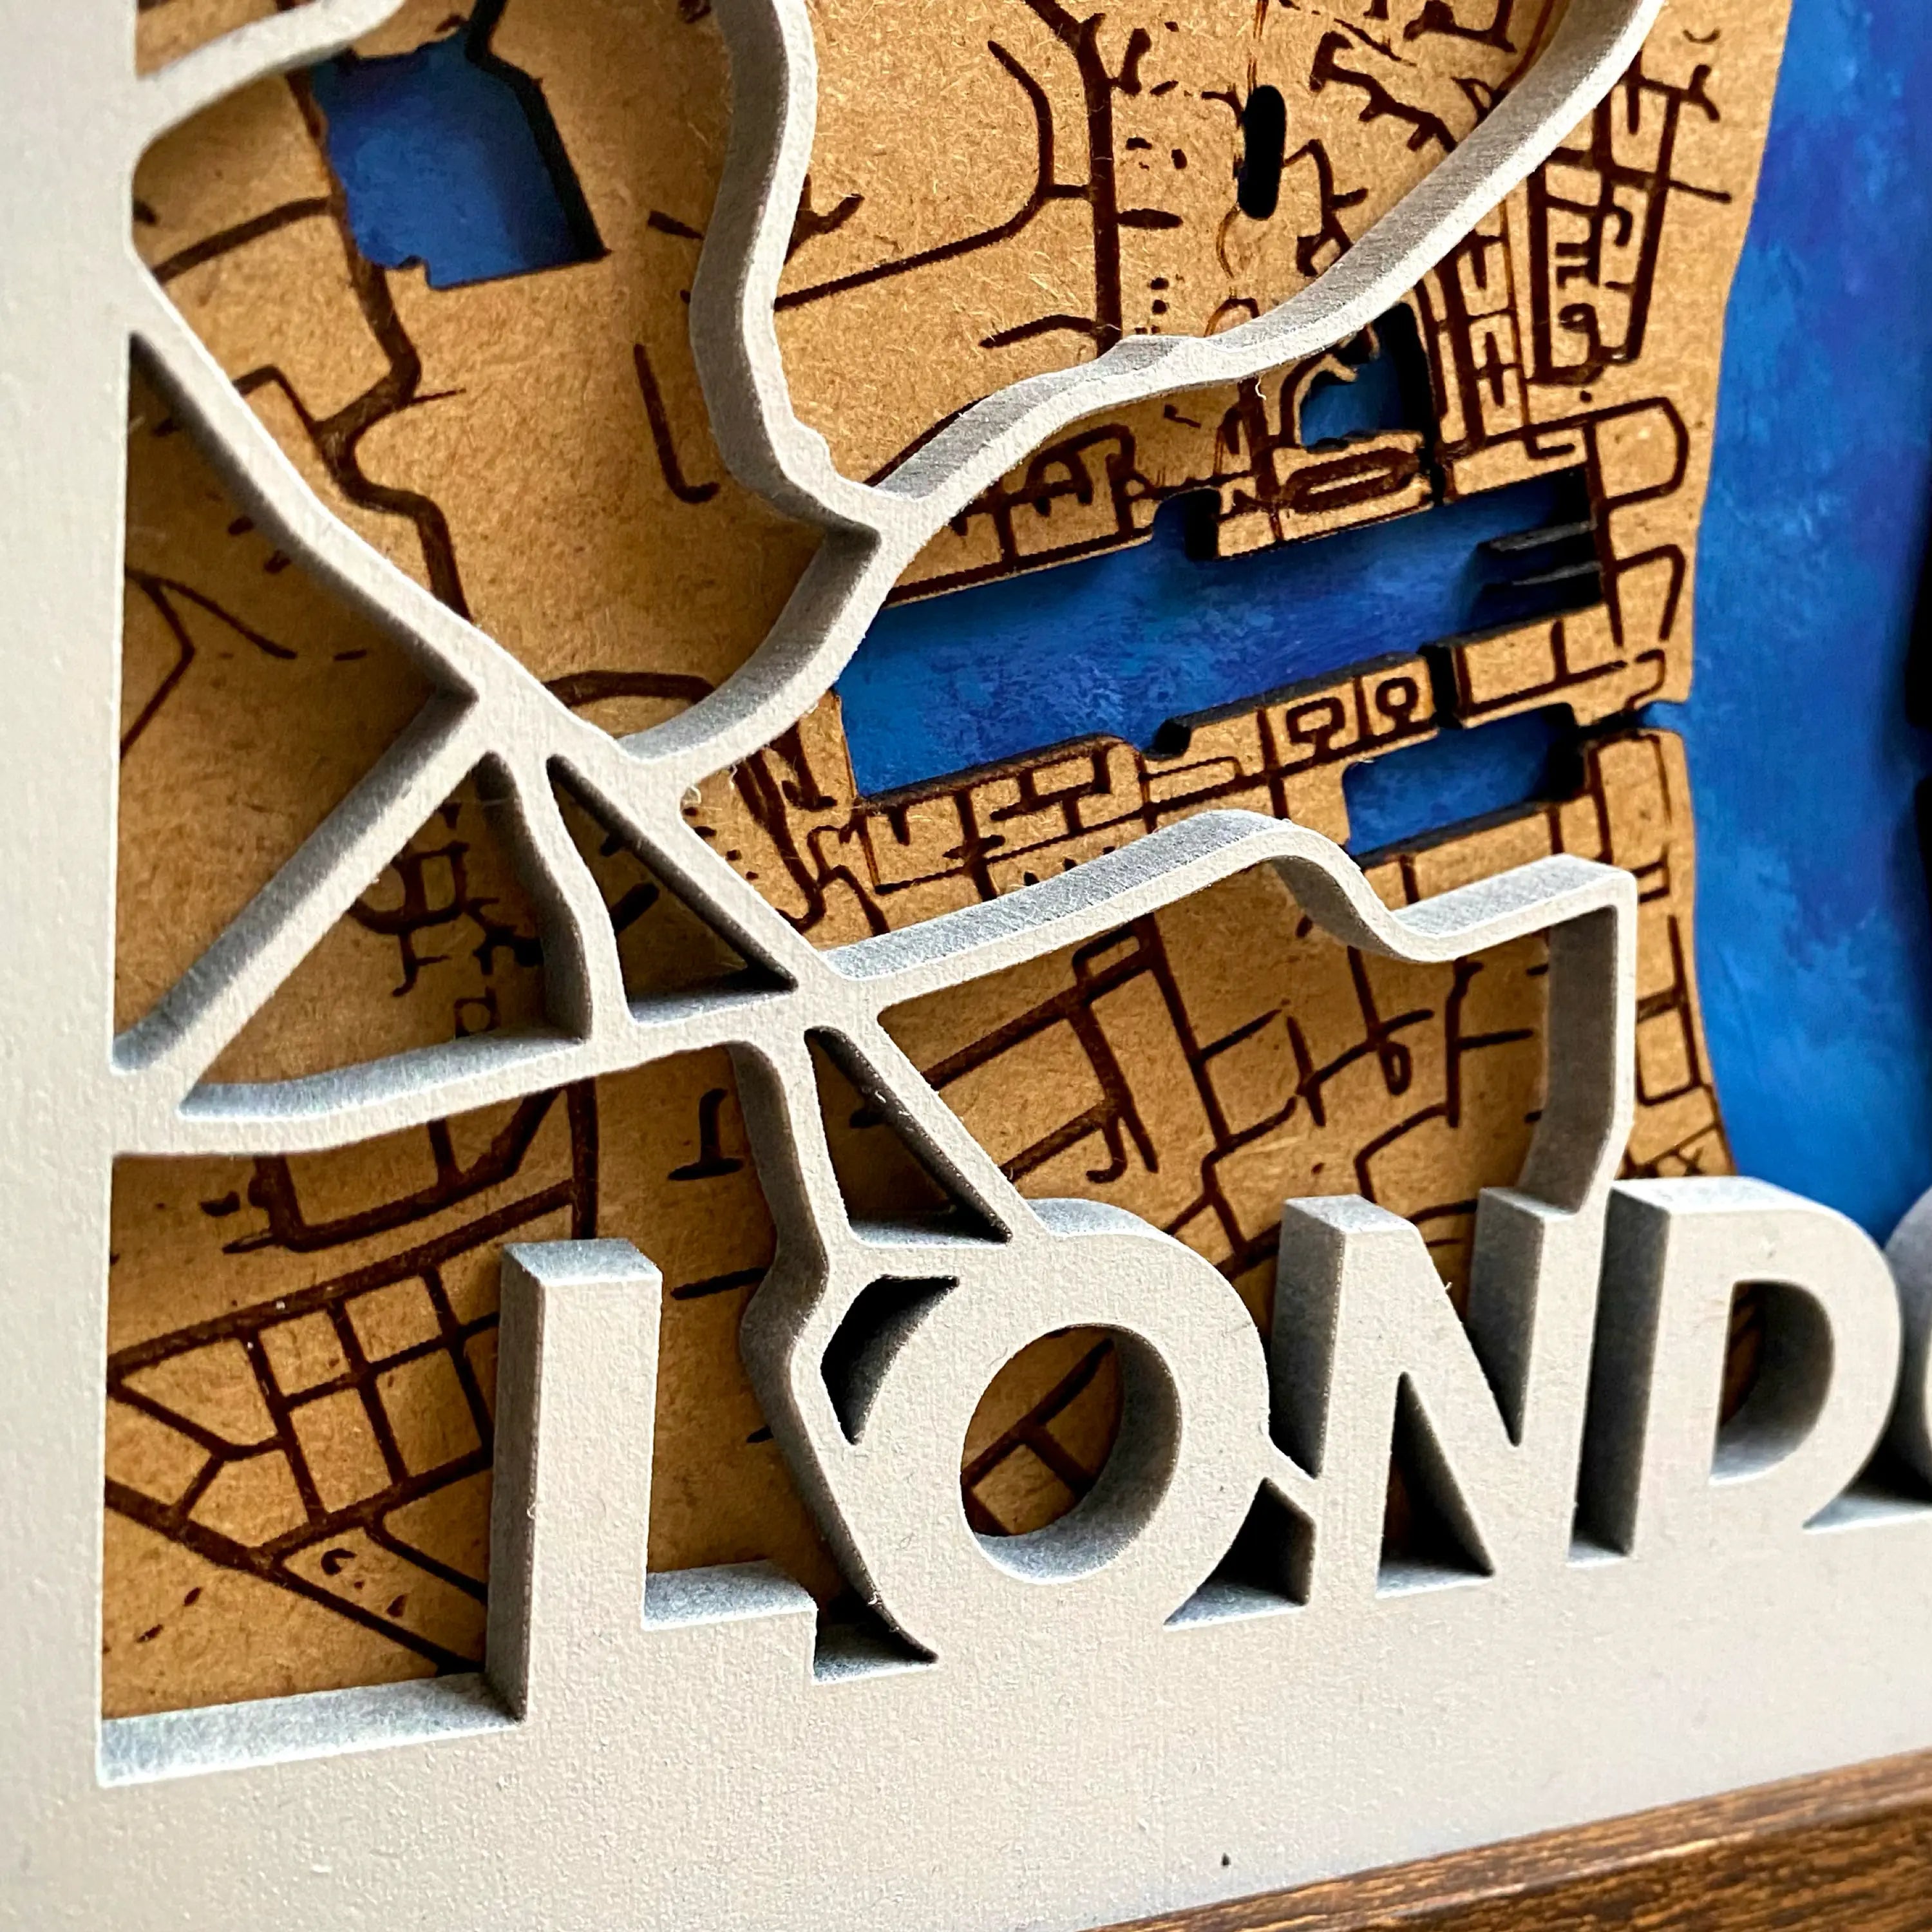 A closer look at the 3D laser-cut MDF letters of LONDON that are hand-painted in white on the bottom left hand corner of the frame. These letters are 3D and connect with the main roads/motorways layer of the wooden map.